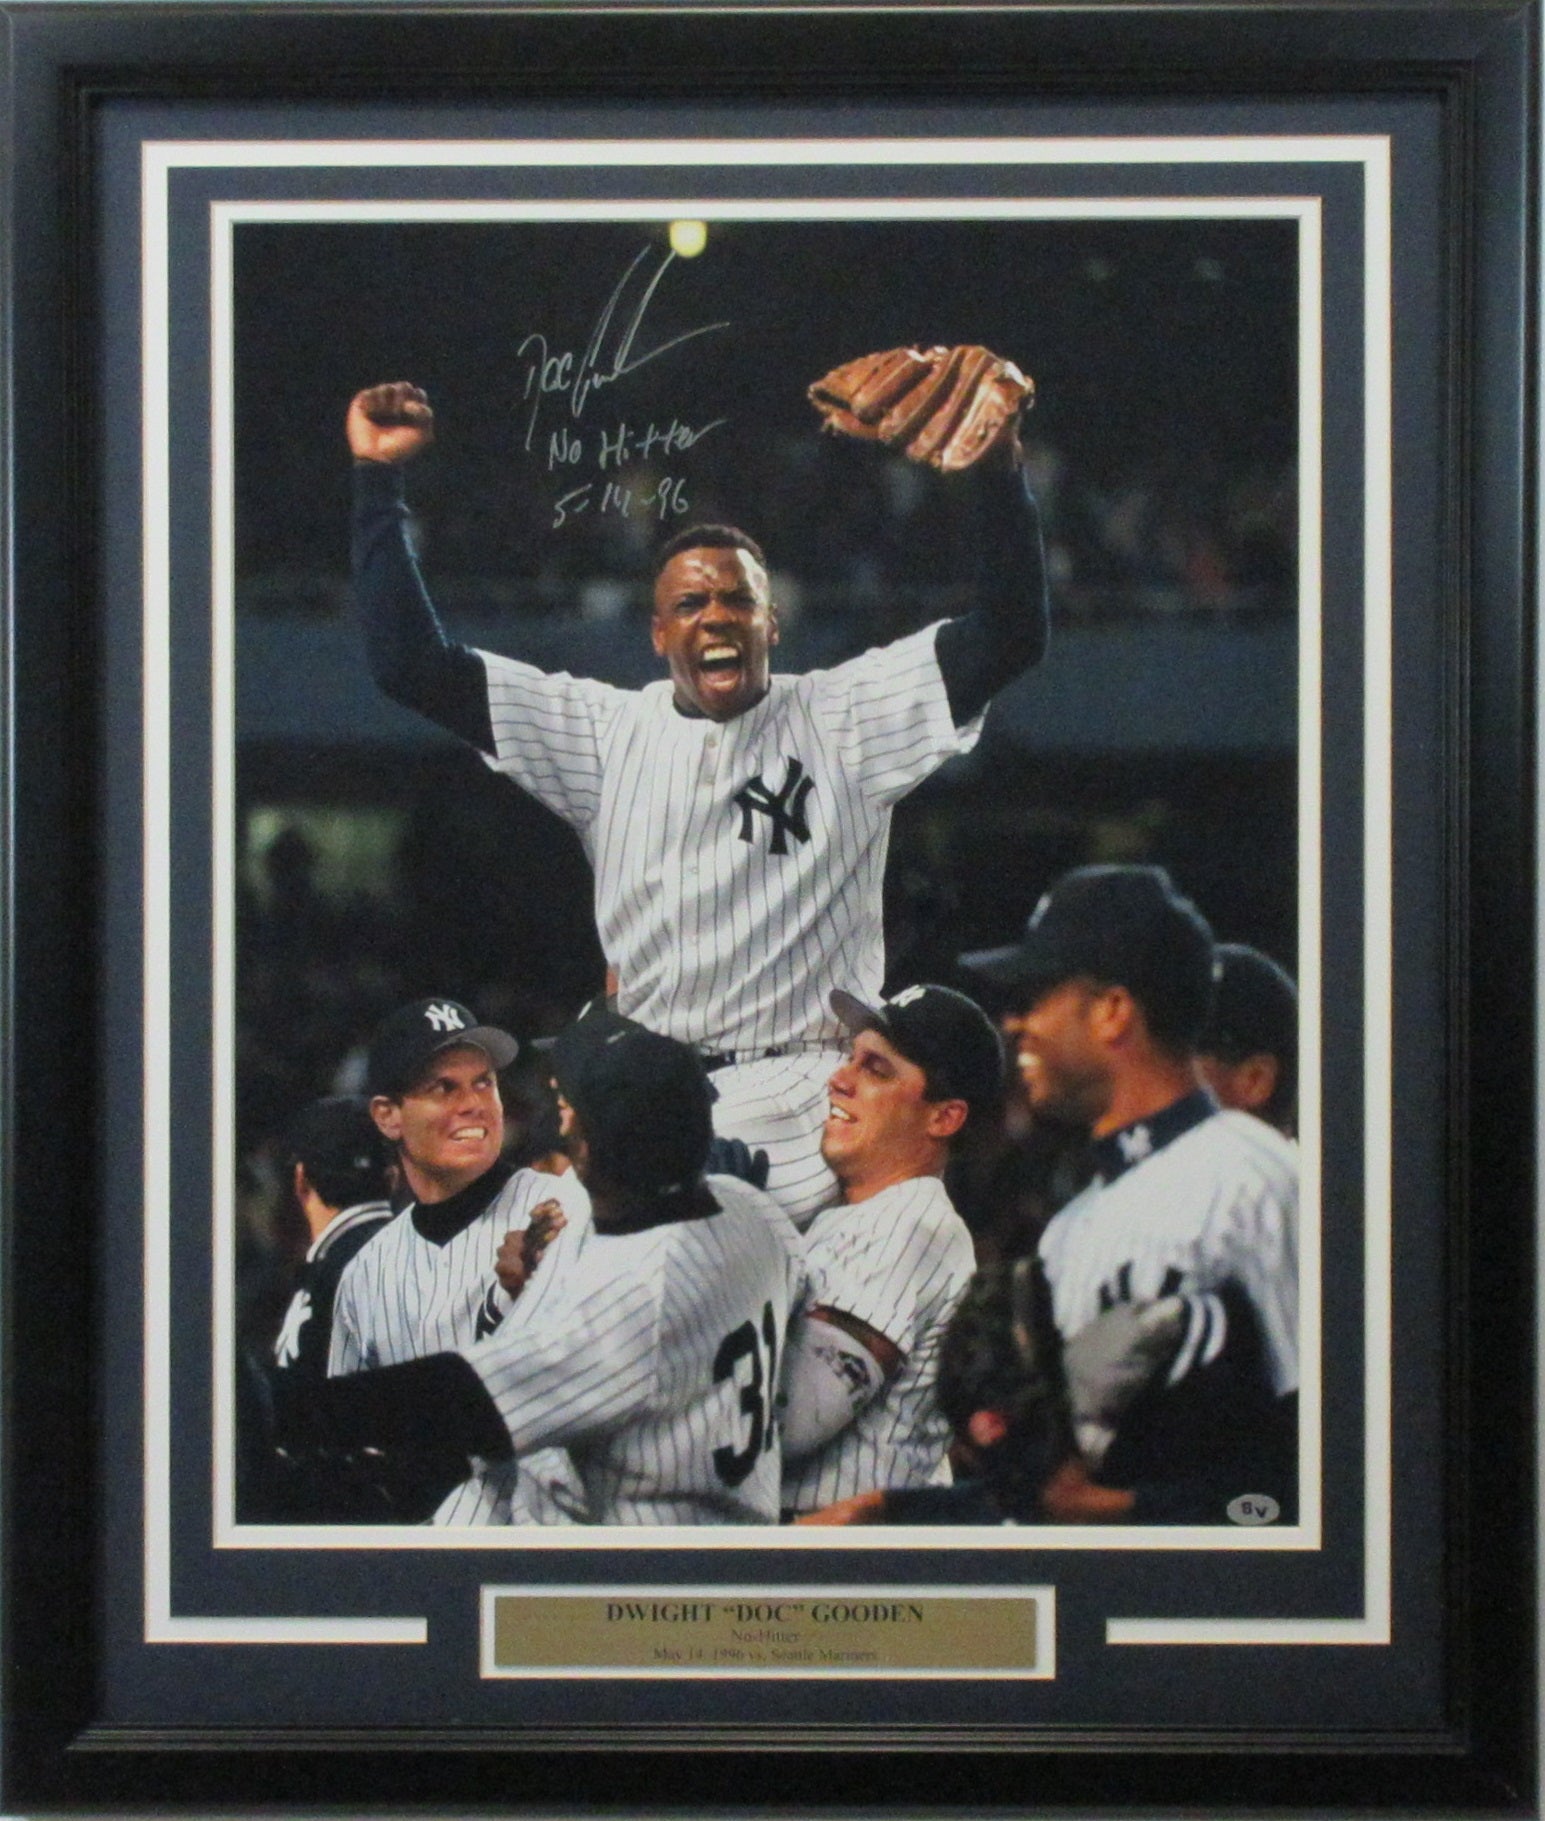 Dwight Gooden New York Yankees Autographed 16x20 "No Hitter" Photo Framed